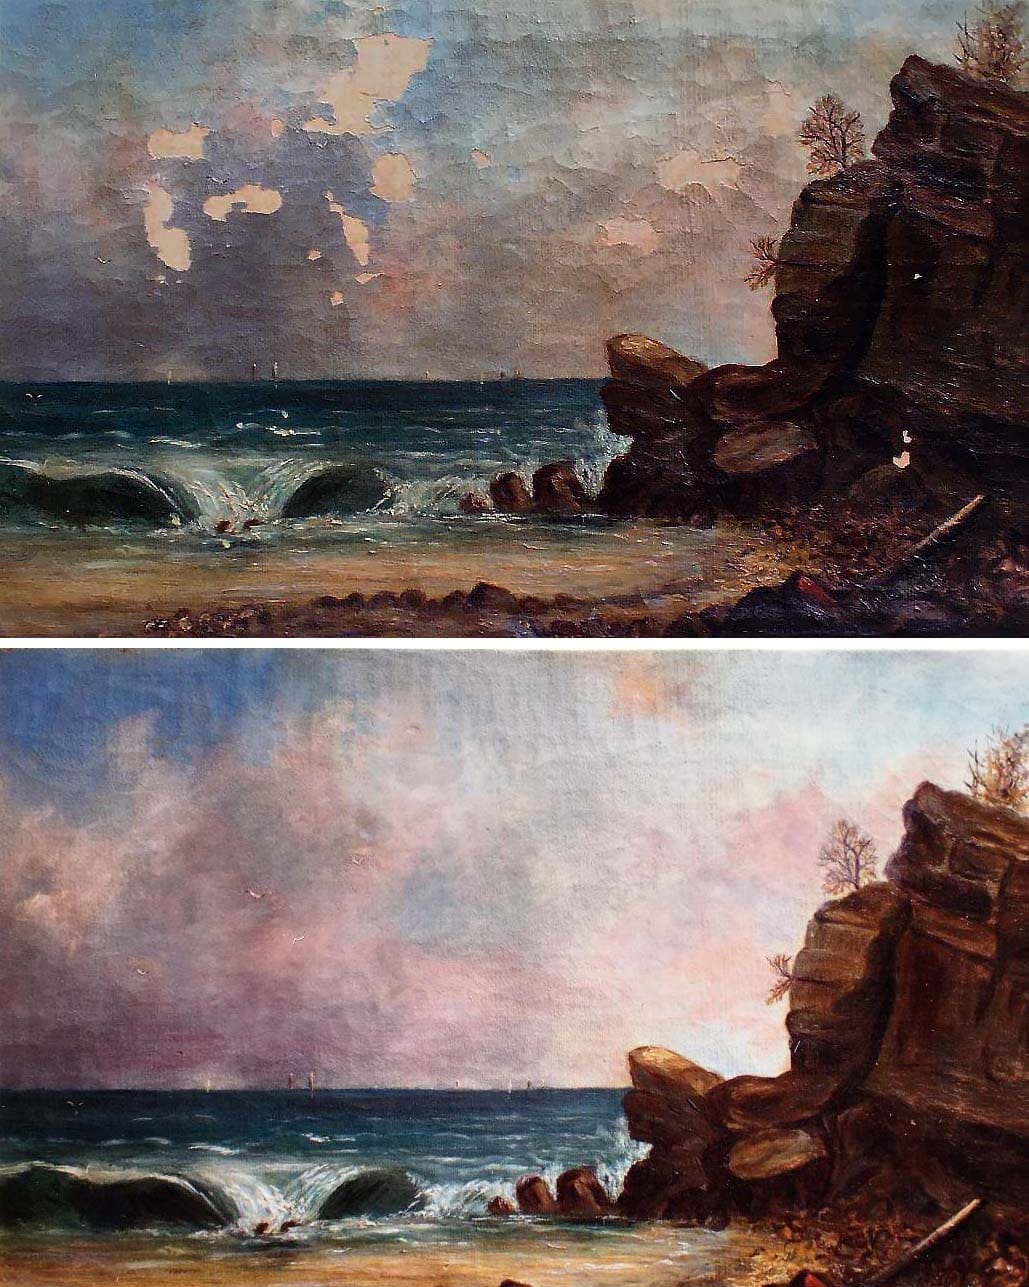 A painting of two different views of the same scene.